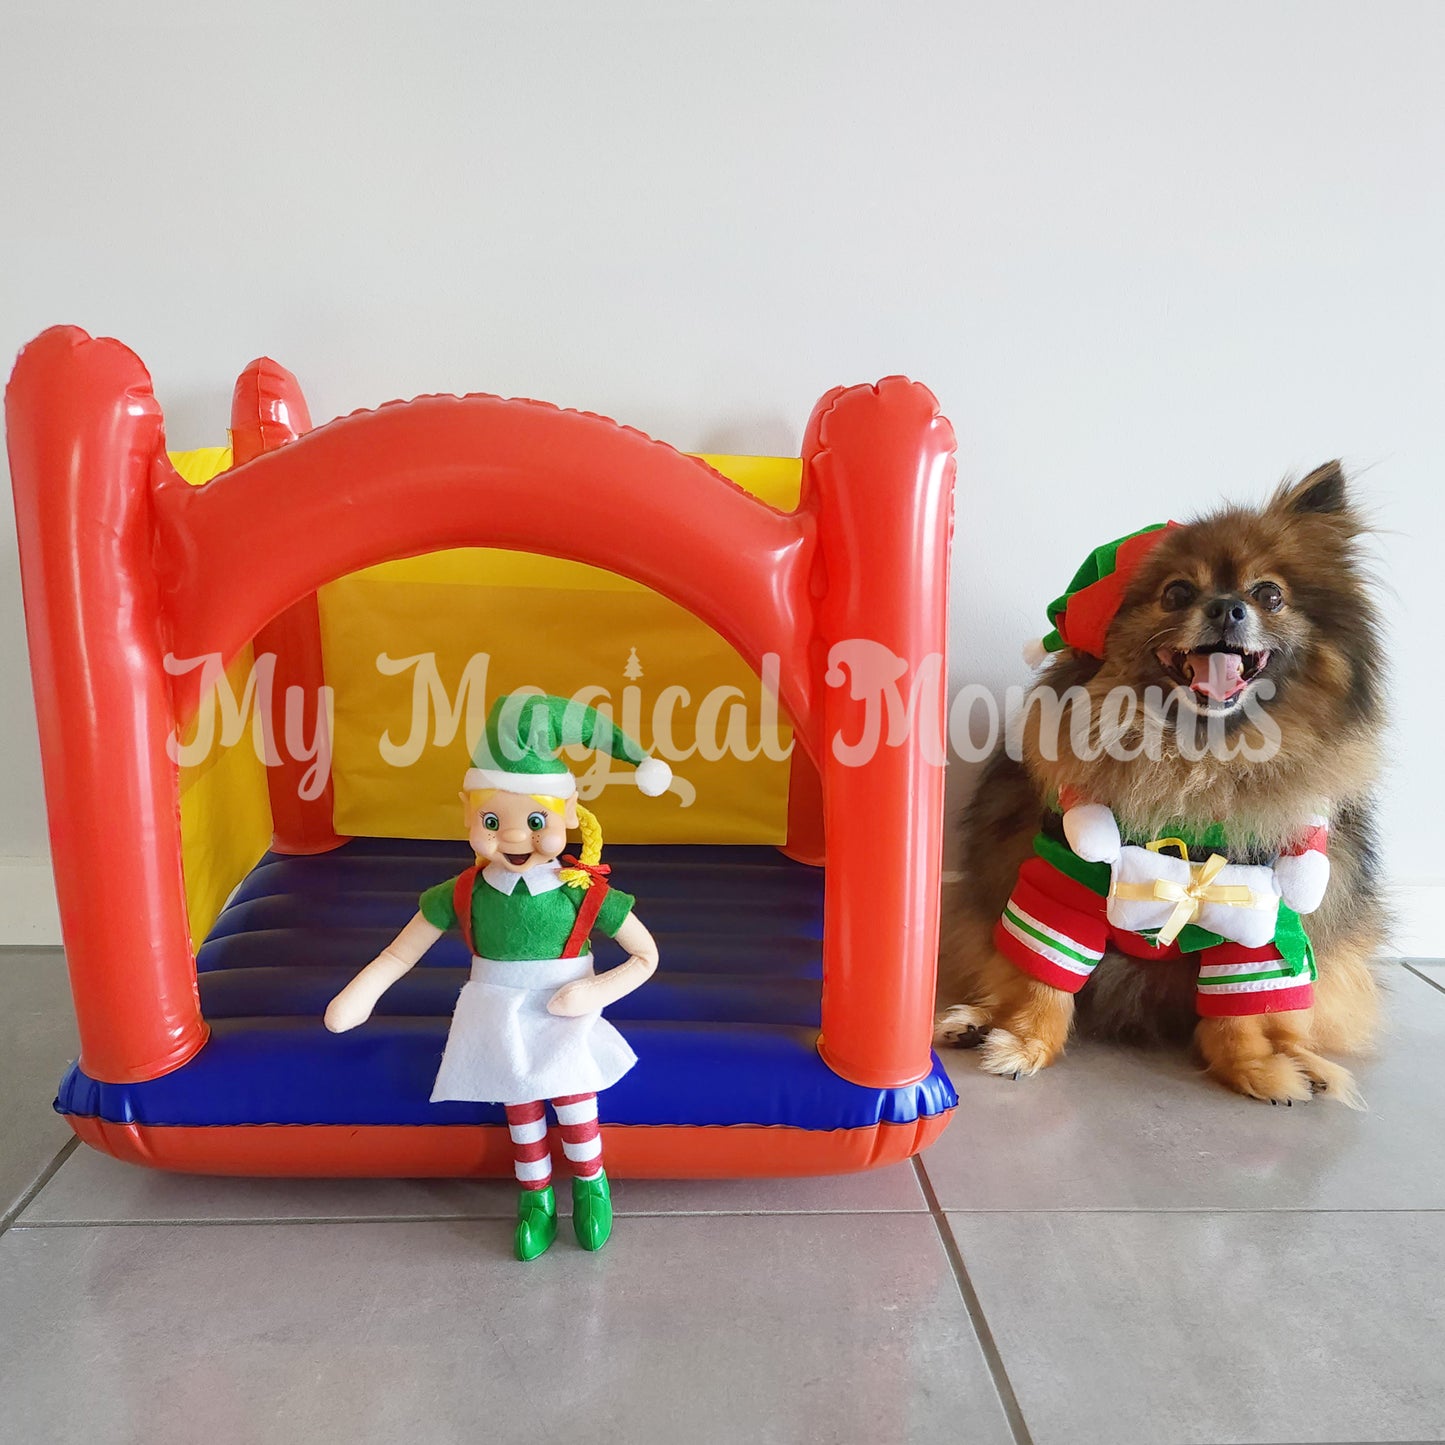 Elf prop bouncy house compared to a Pomeranian dog